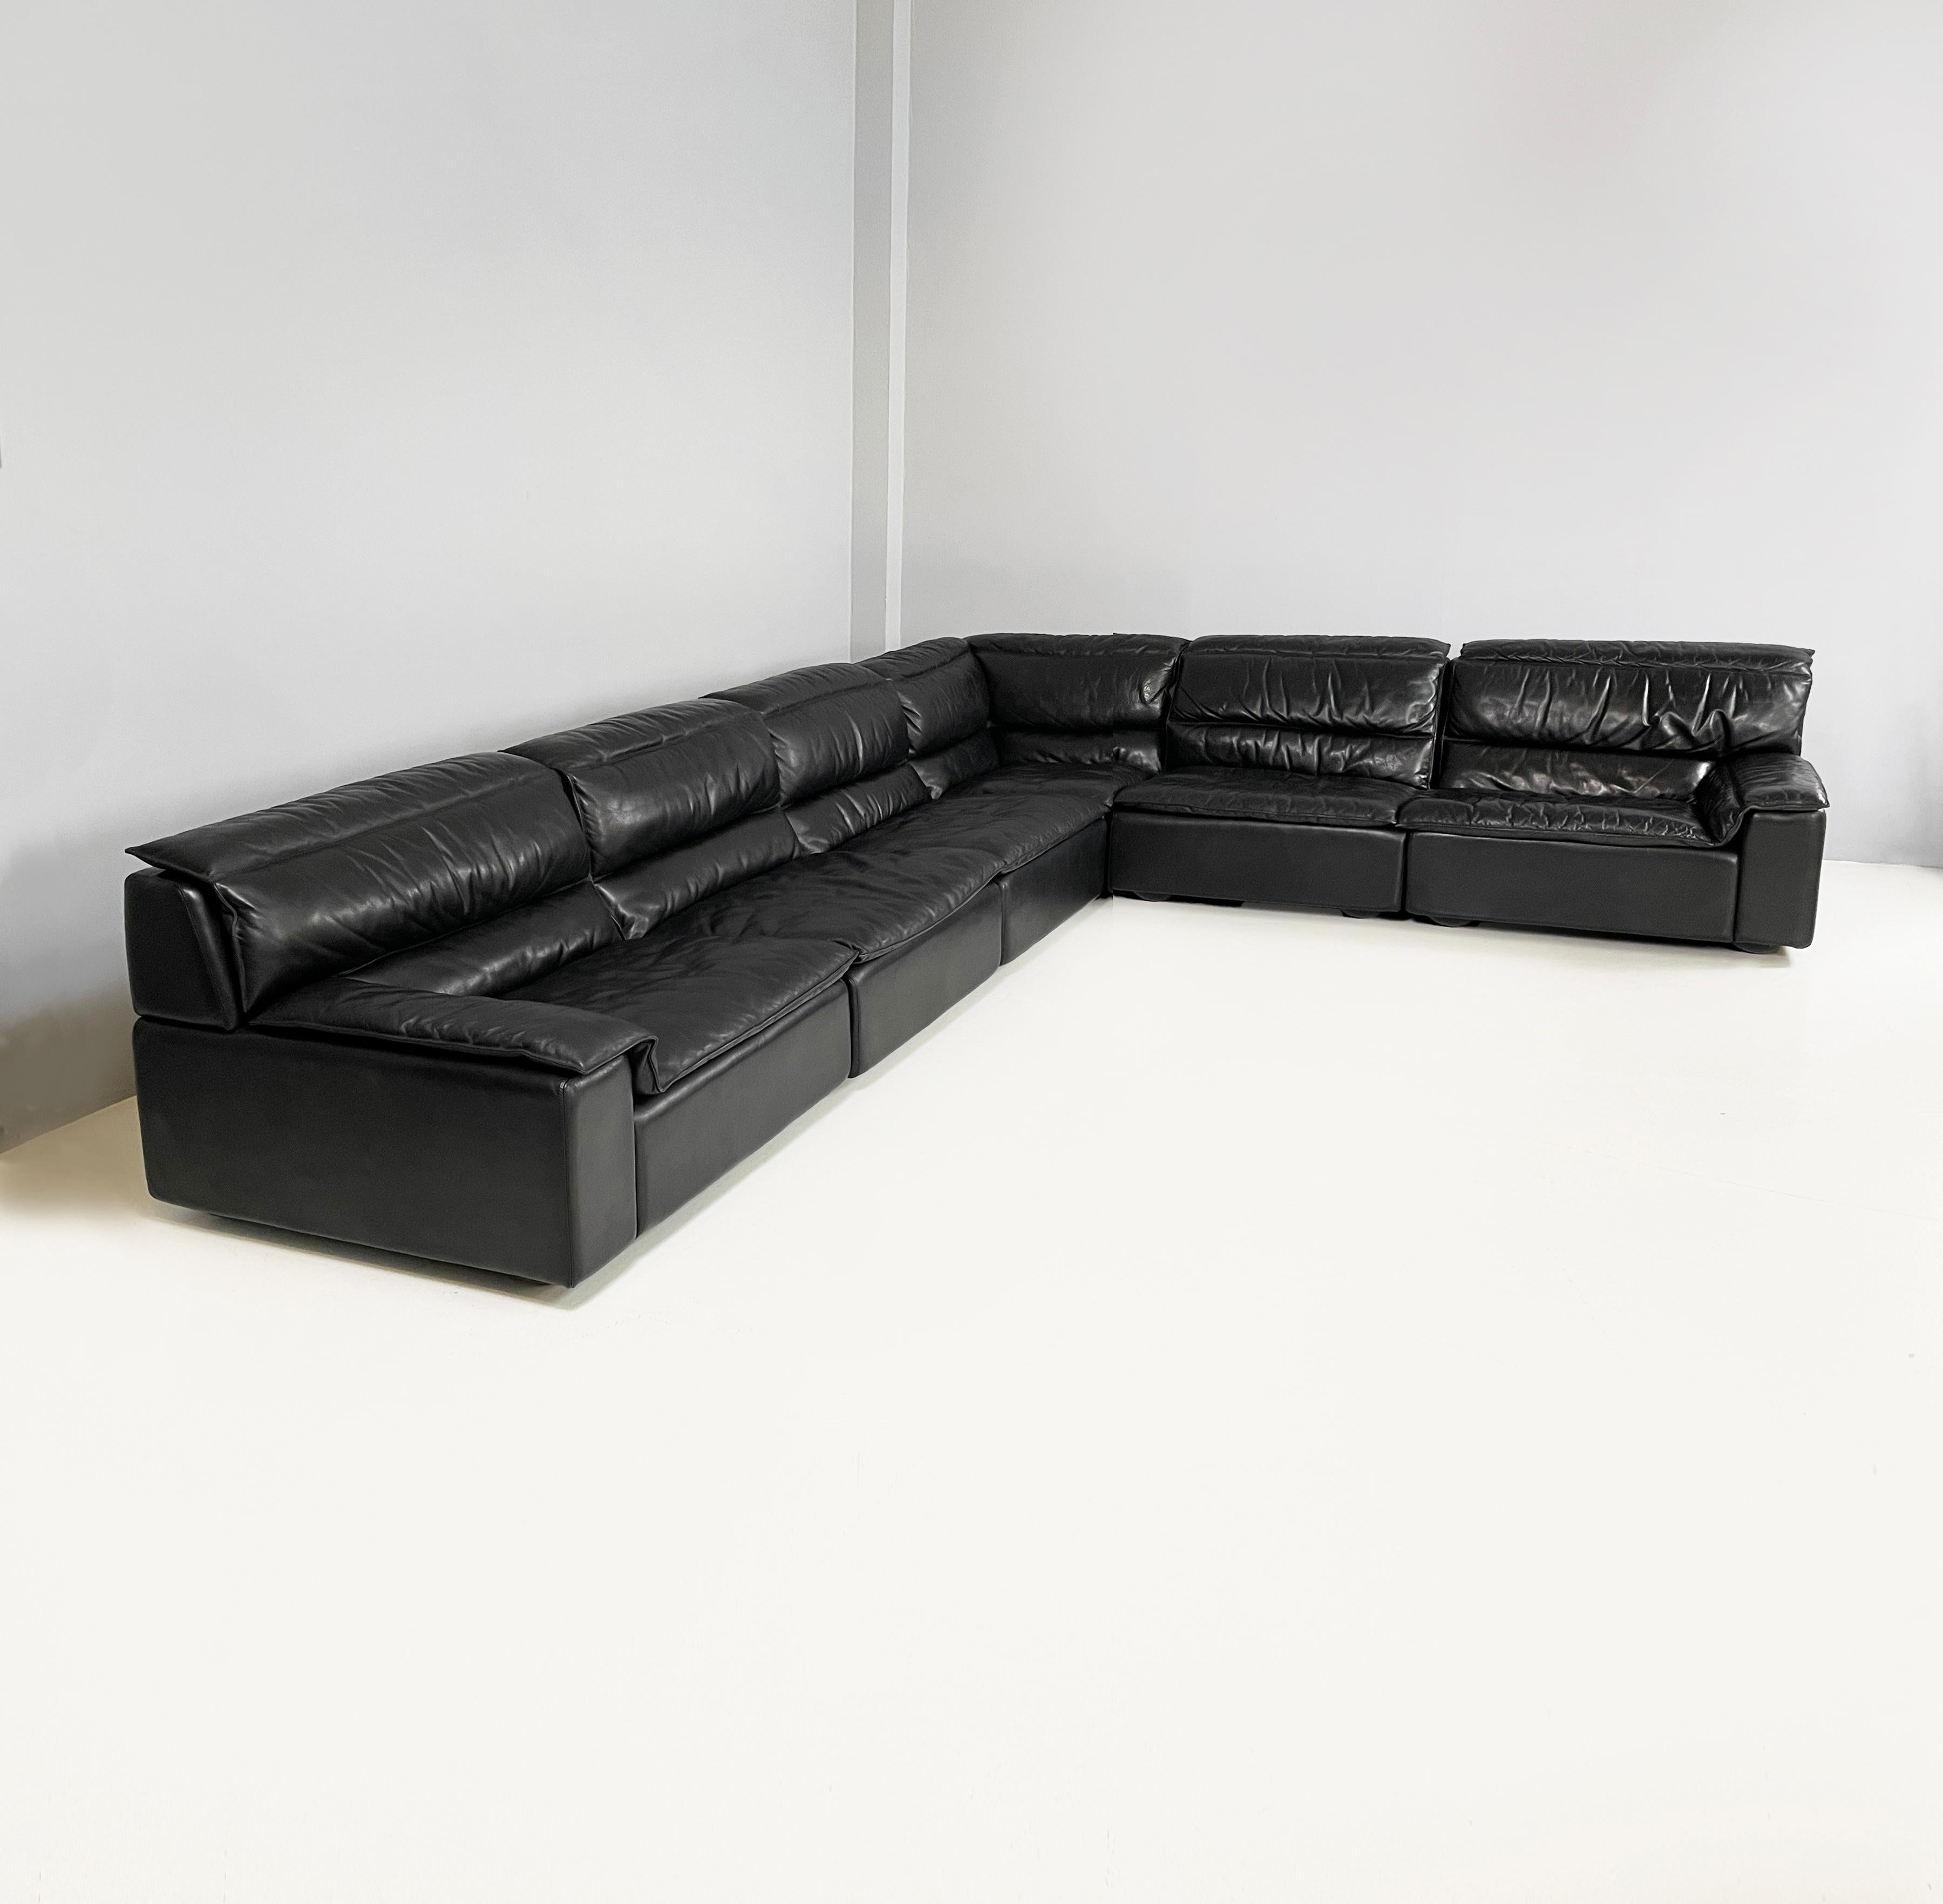 Italian modern black leather sofa Bogo Carlo Bartoli Rossi for Albizzate, 1970s
Modular sofa mod. Bogo entirely padded and covered in black leather. The sofa includes 6 modules: 2 modules with armrests, 3 simple modules and a corner module. The